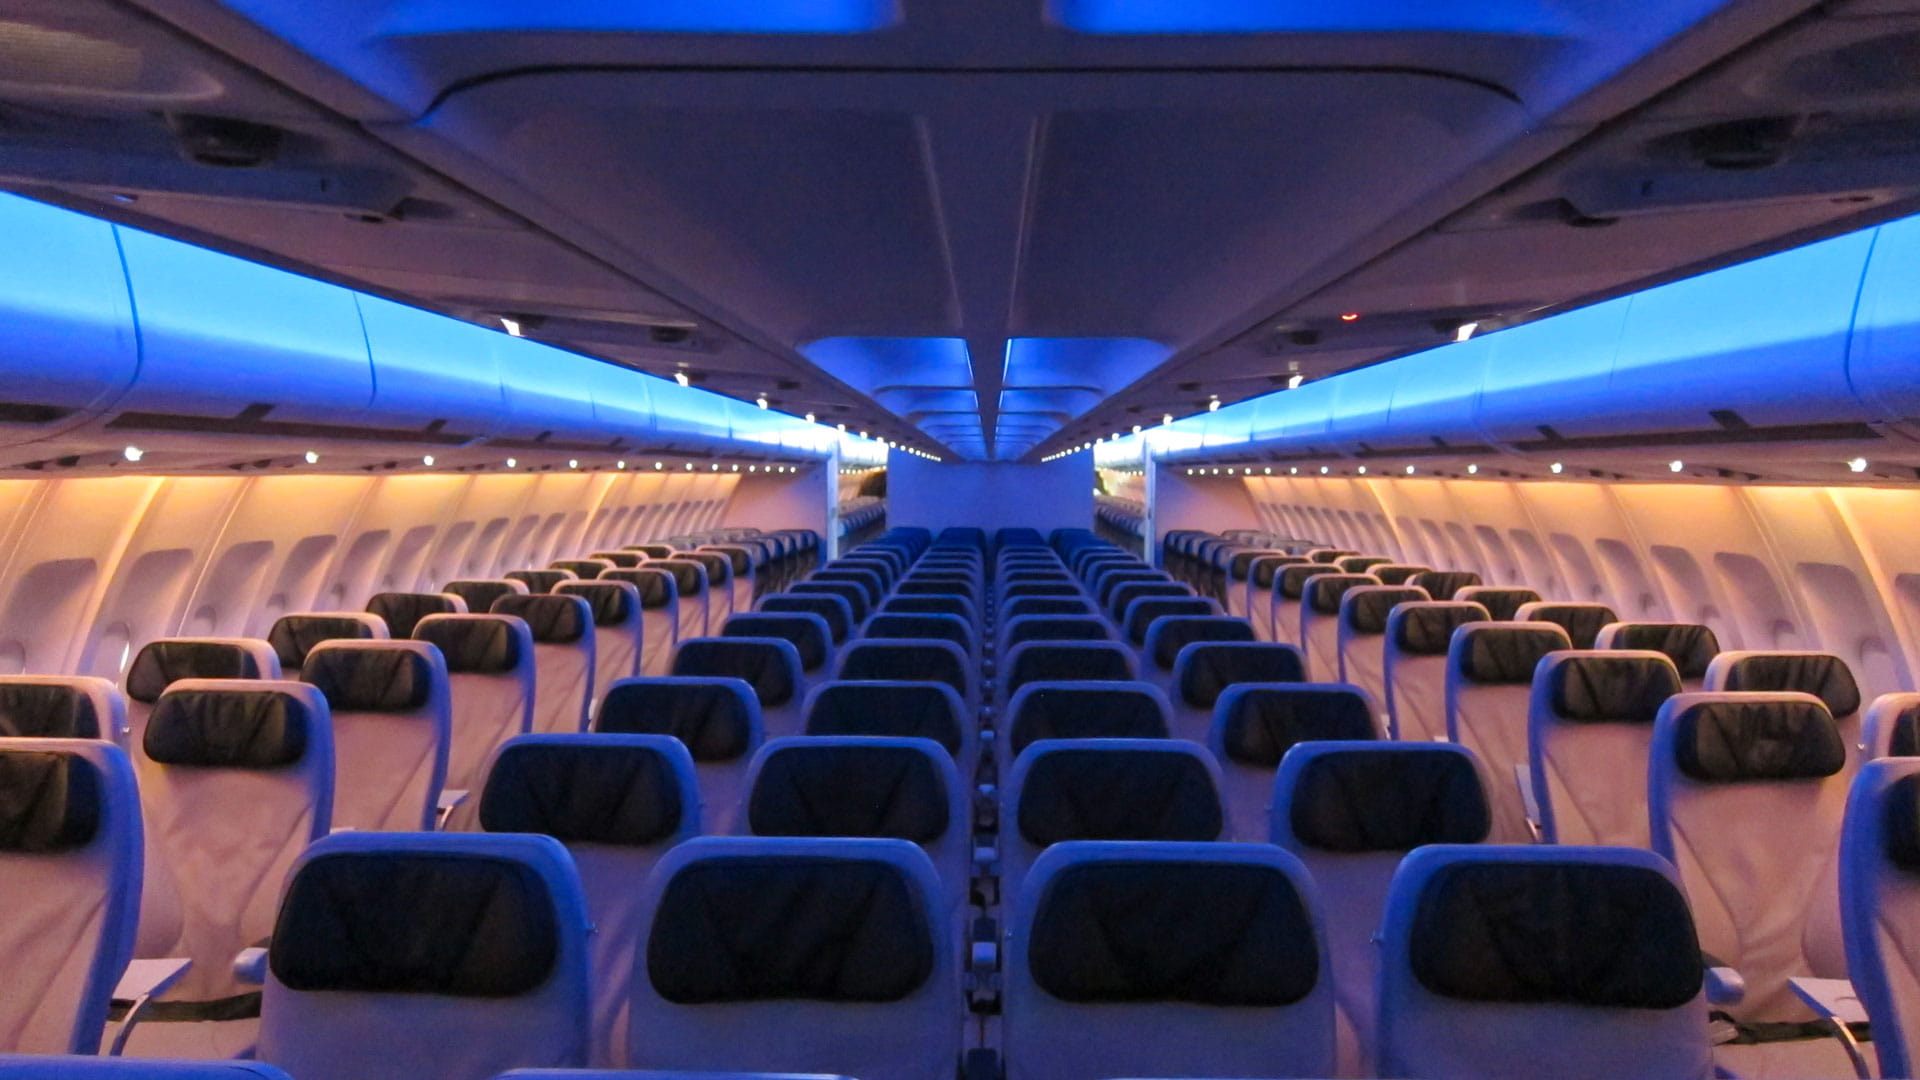 Tapestry lighting system used on an Azul A330